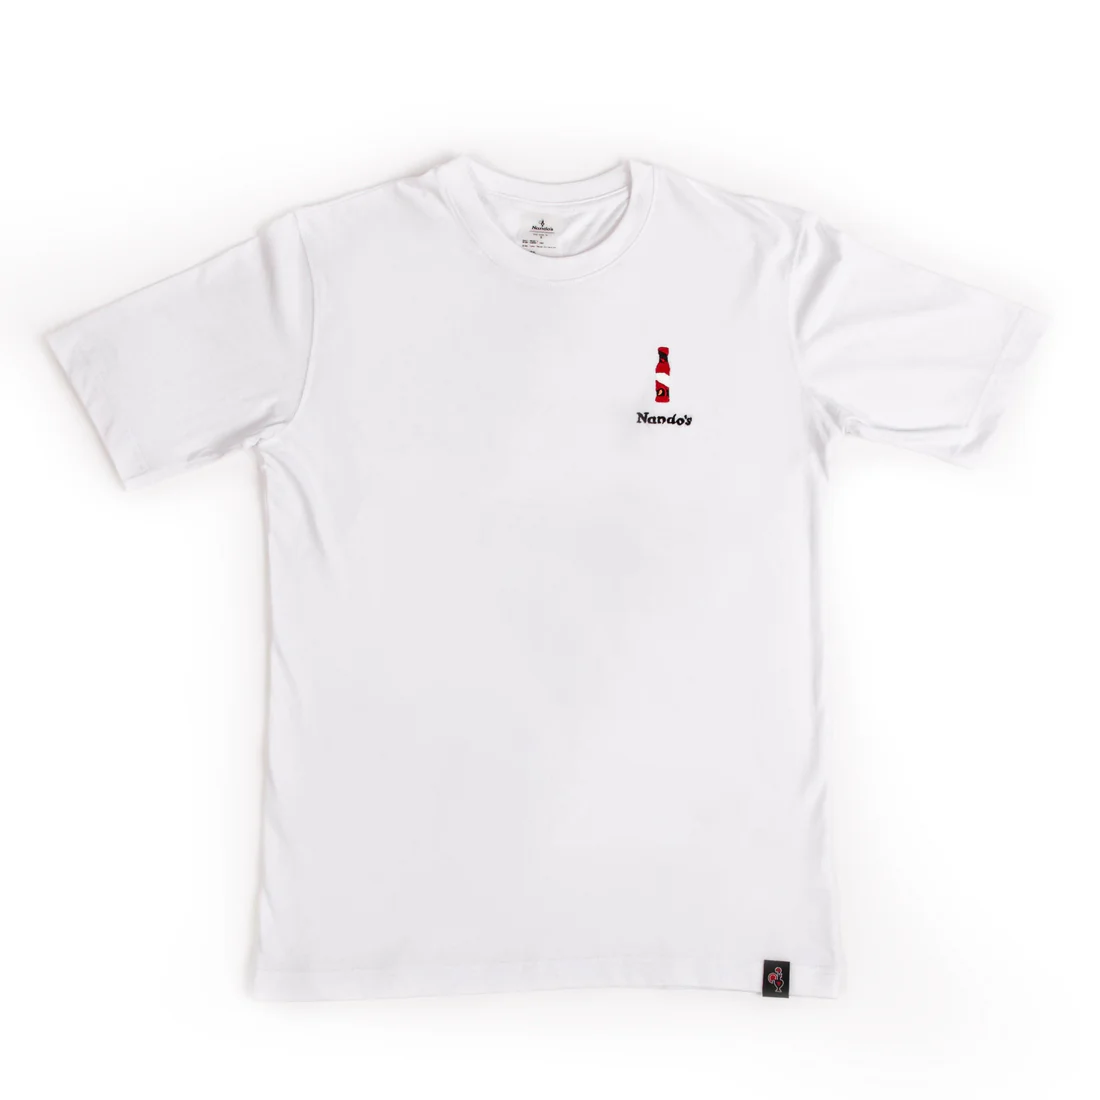 A white T-shirt with a small embroidered sauce bottle on the chest. Extra Hot is printed across the back in black.